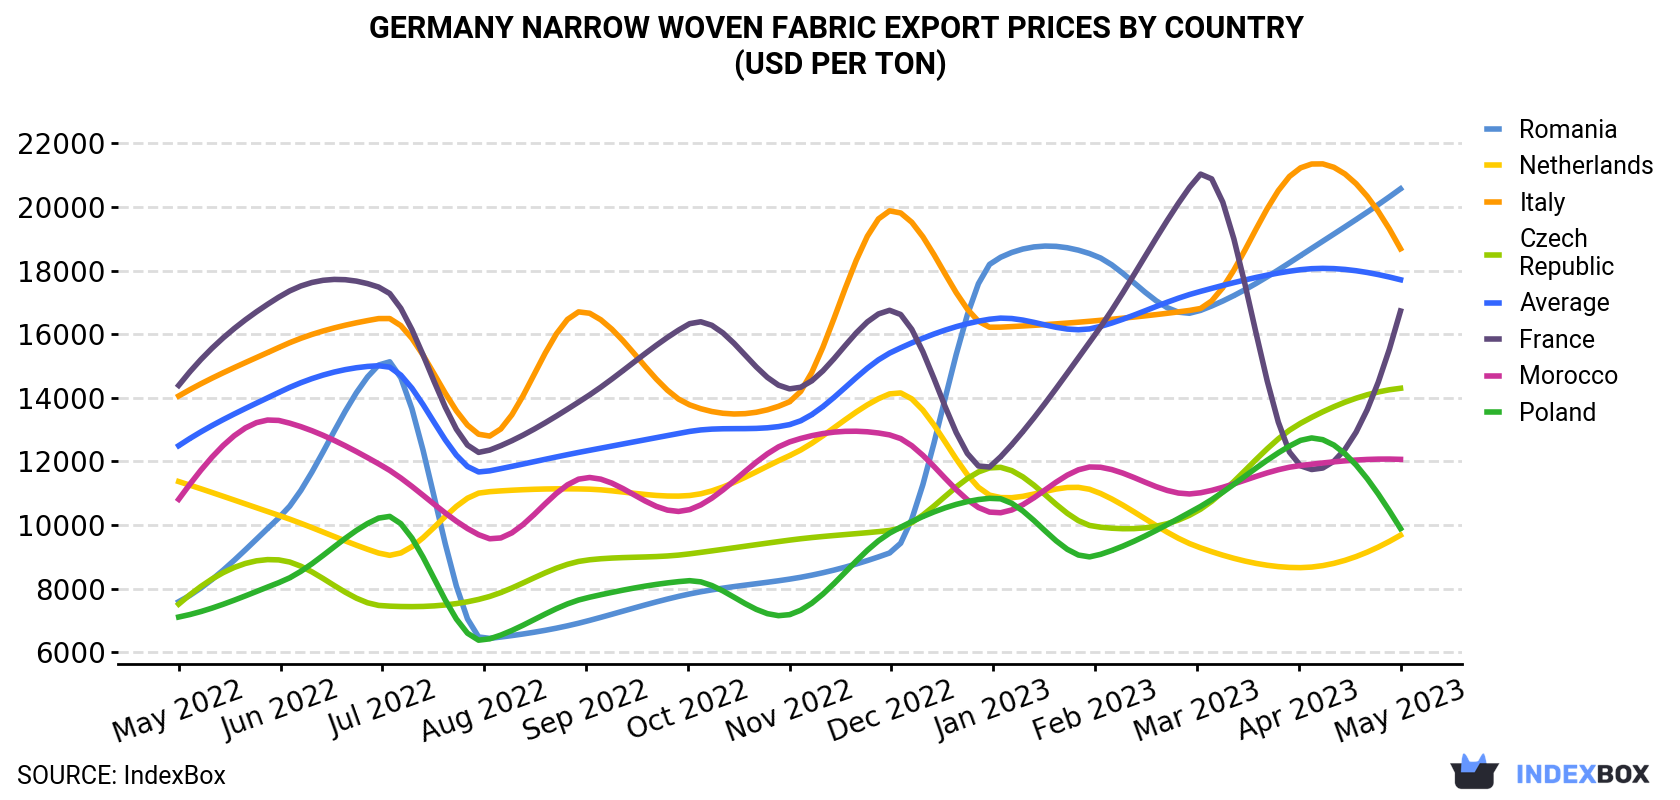 Germany Narrow Woven Fabric Export Prices By Country (USD Per Ton)